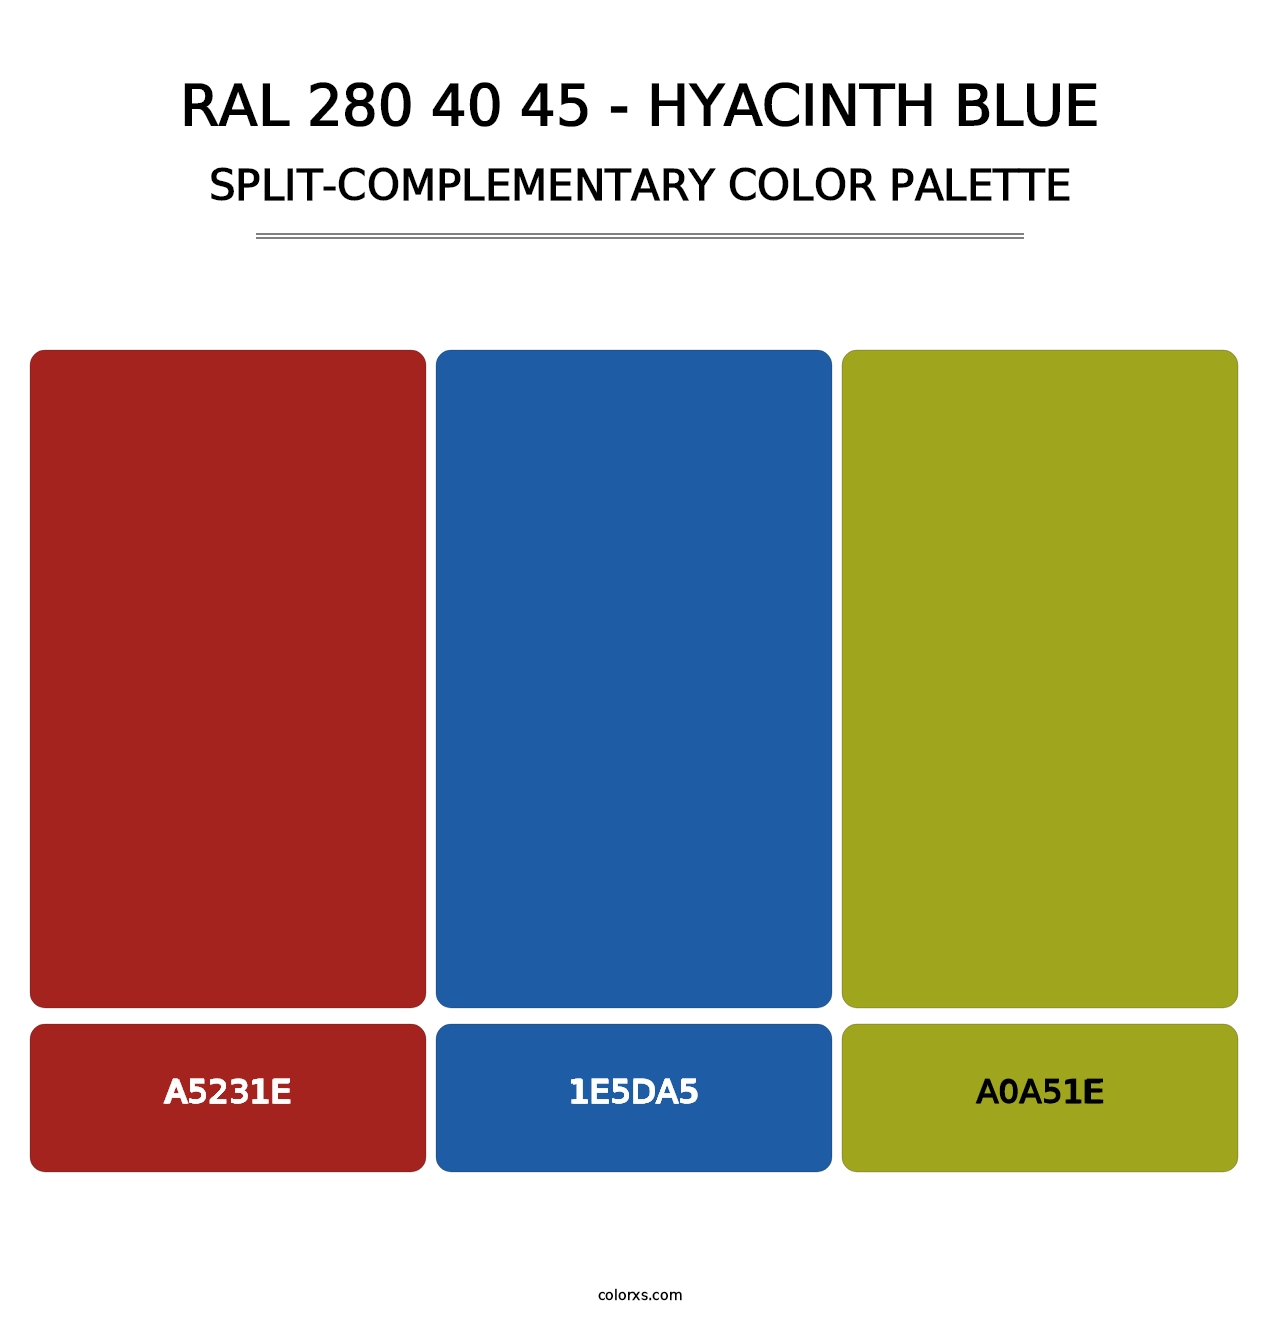 RAL 280 40 45 - Hyacinth Blue - Split-Complementary Color Palette